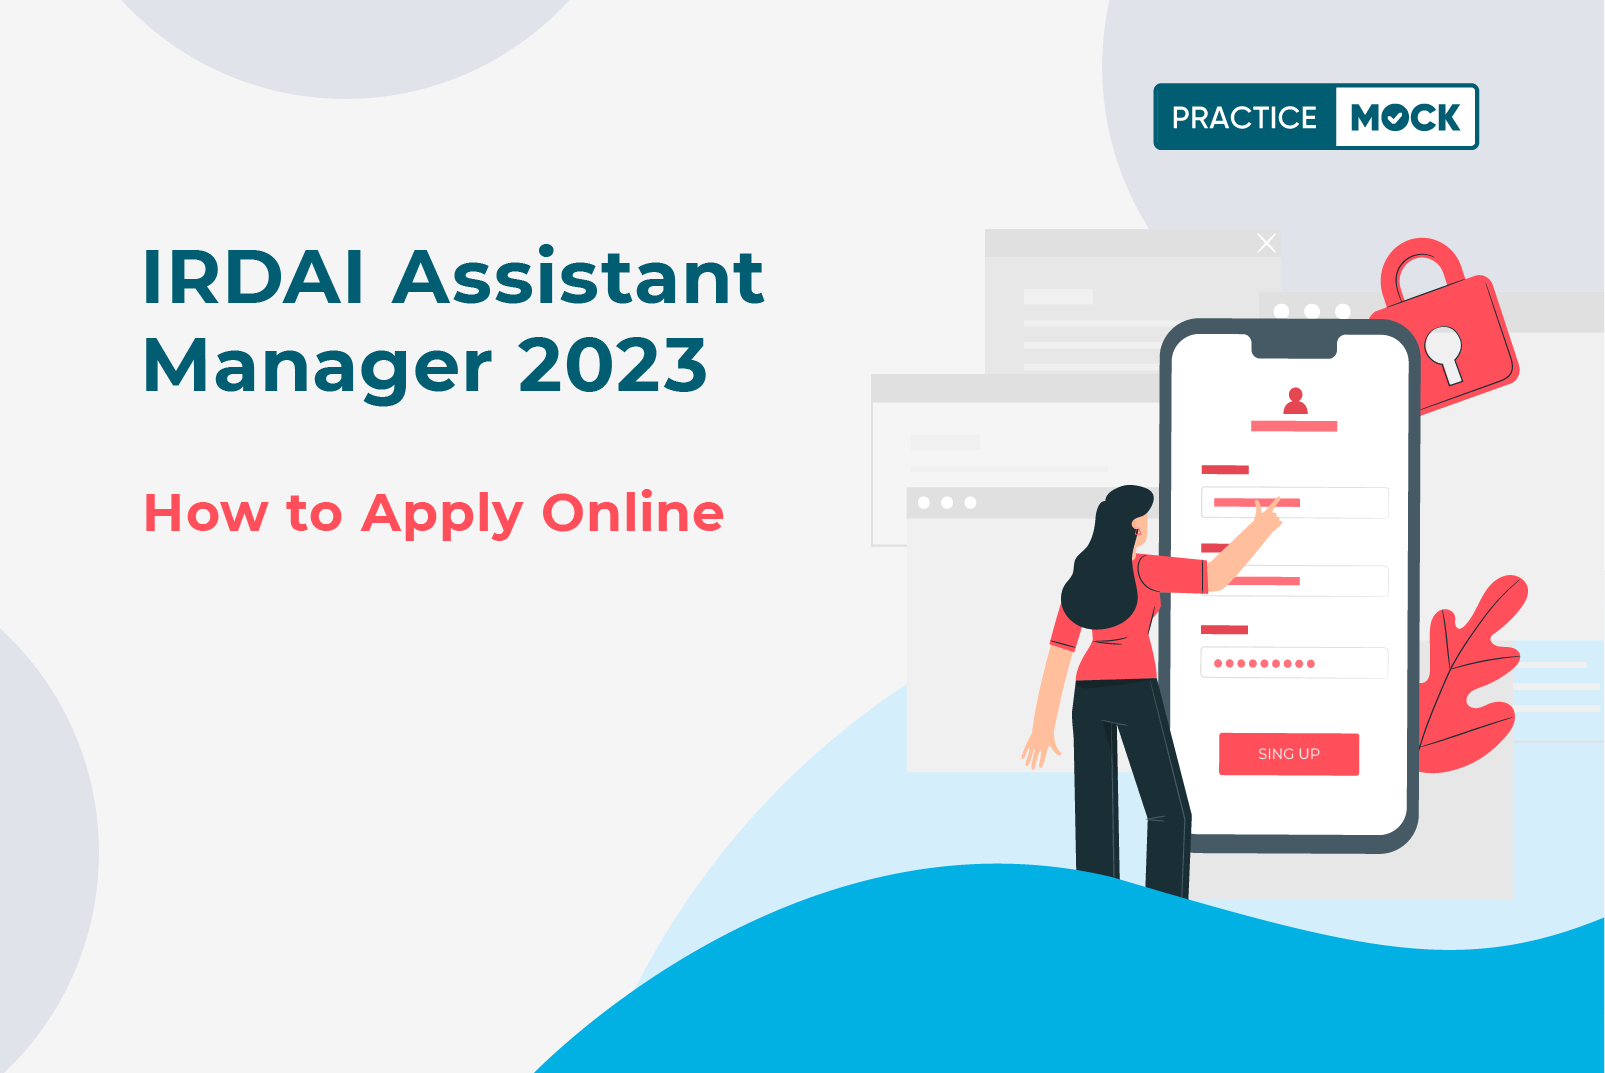 IRDAI Assistant Manager 2023 - How to Apply Online